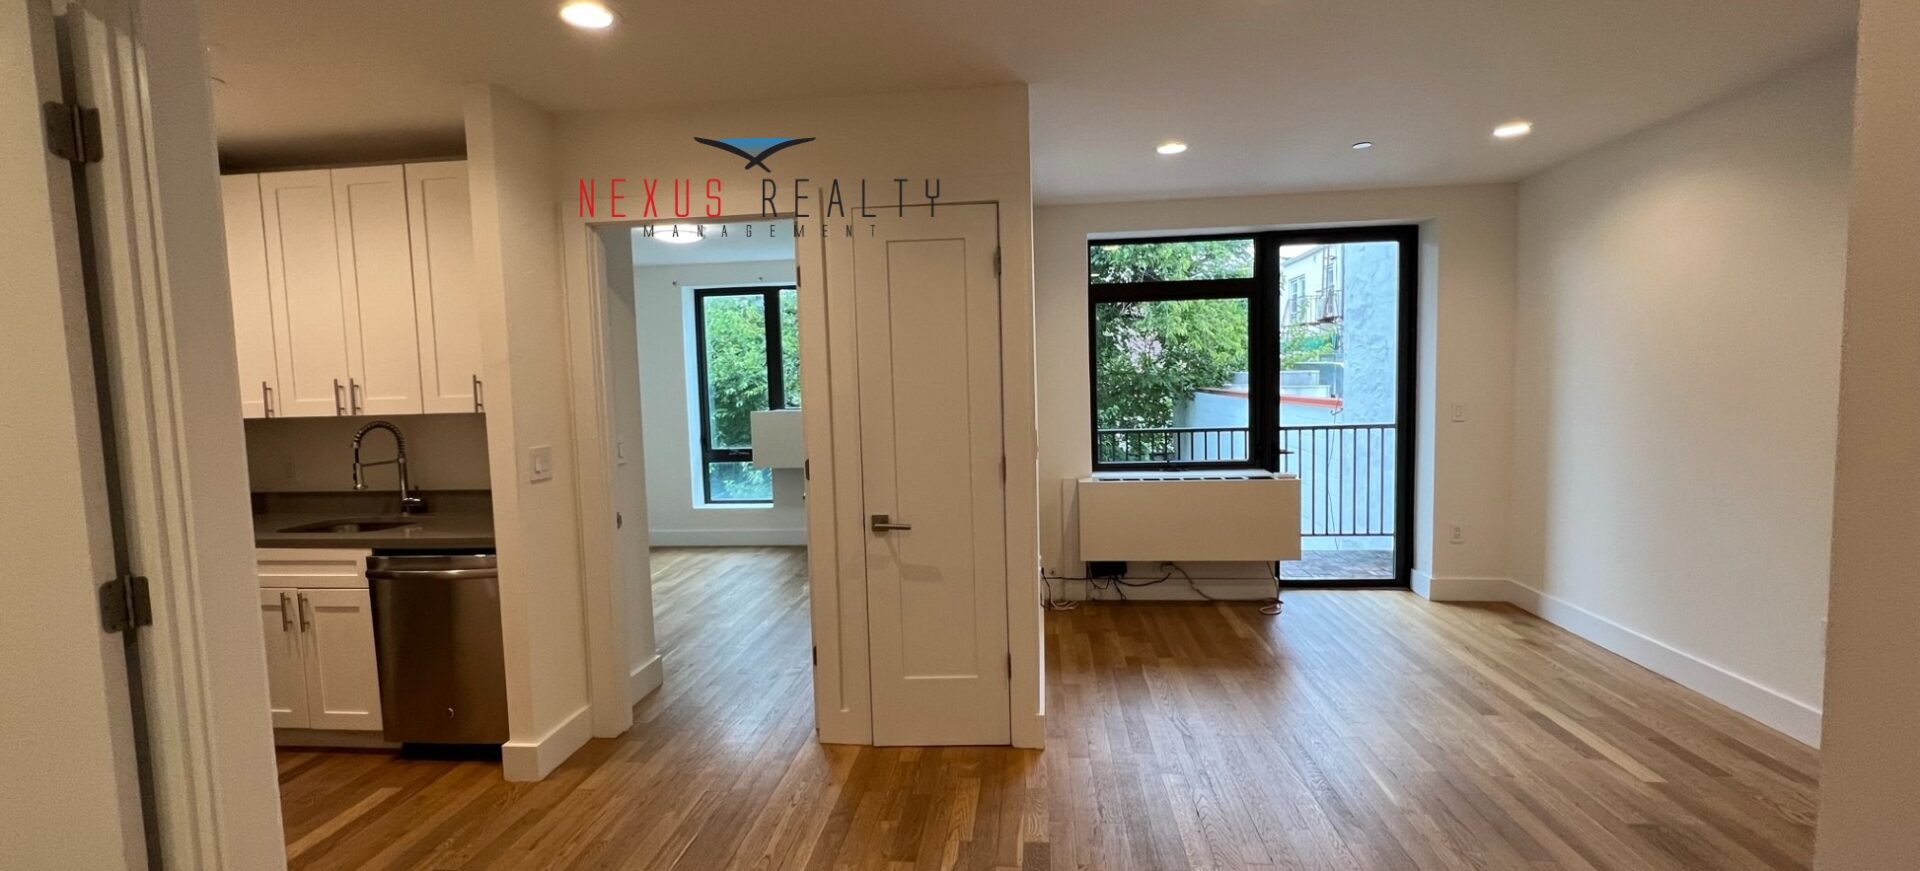 Brand New 1 Bedroom Apartment with balcony in Astoria $2950